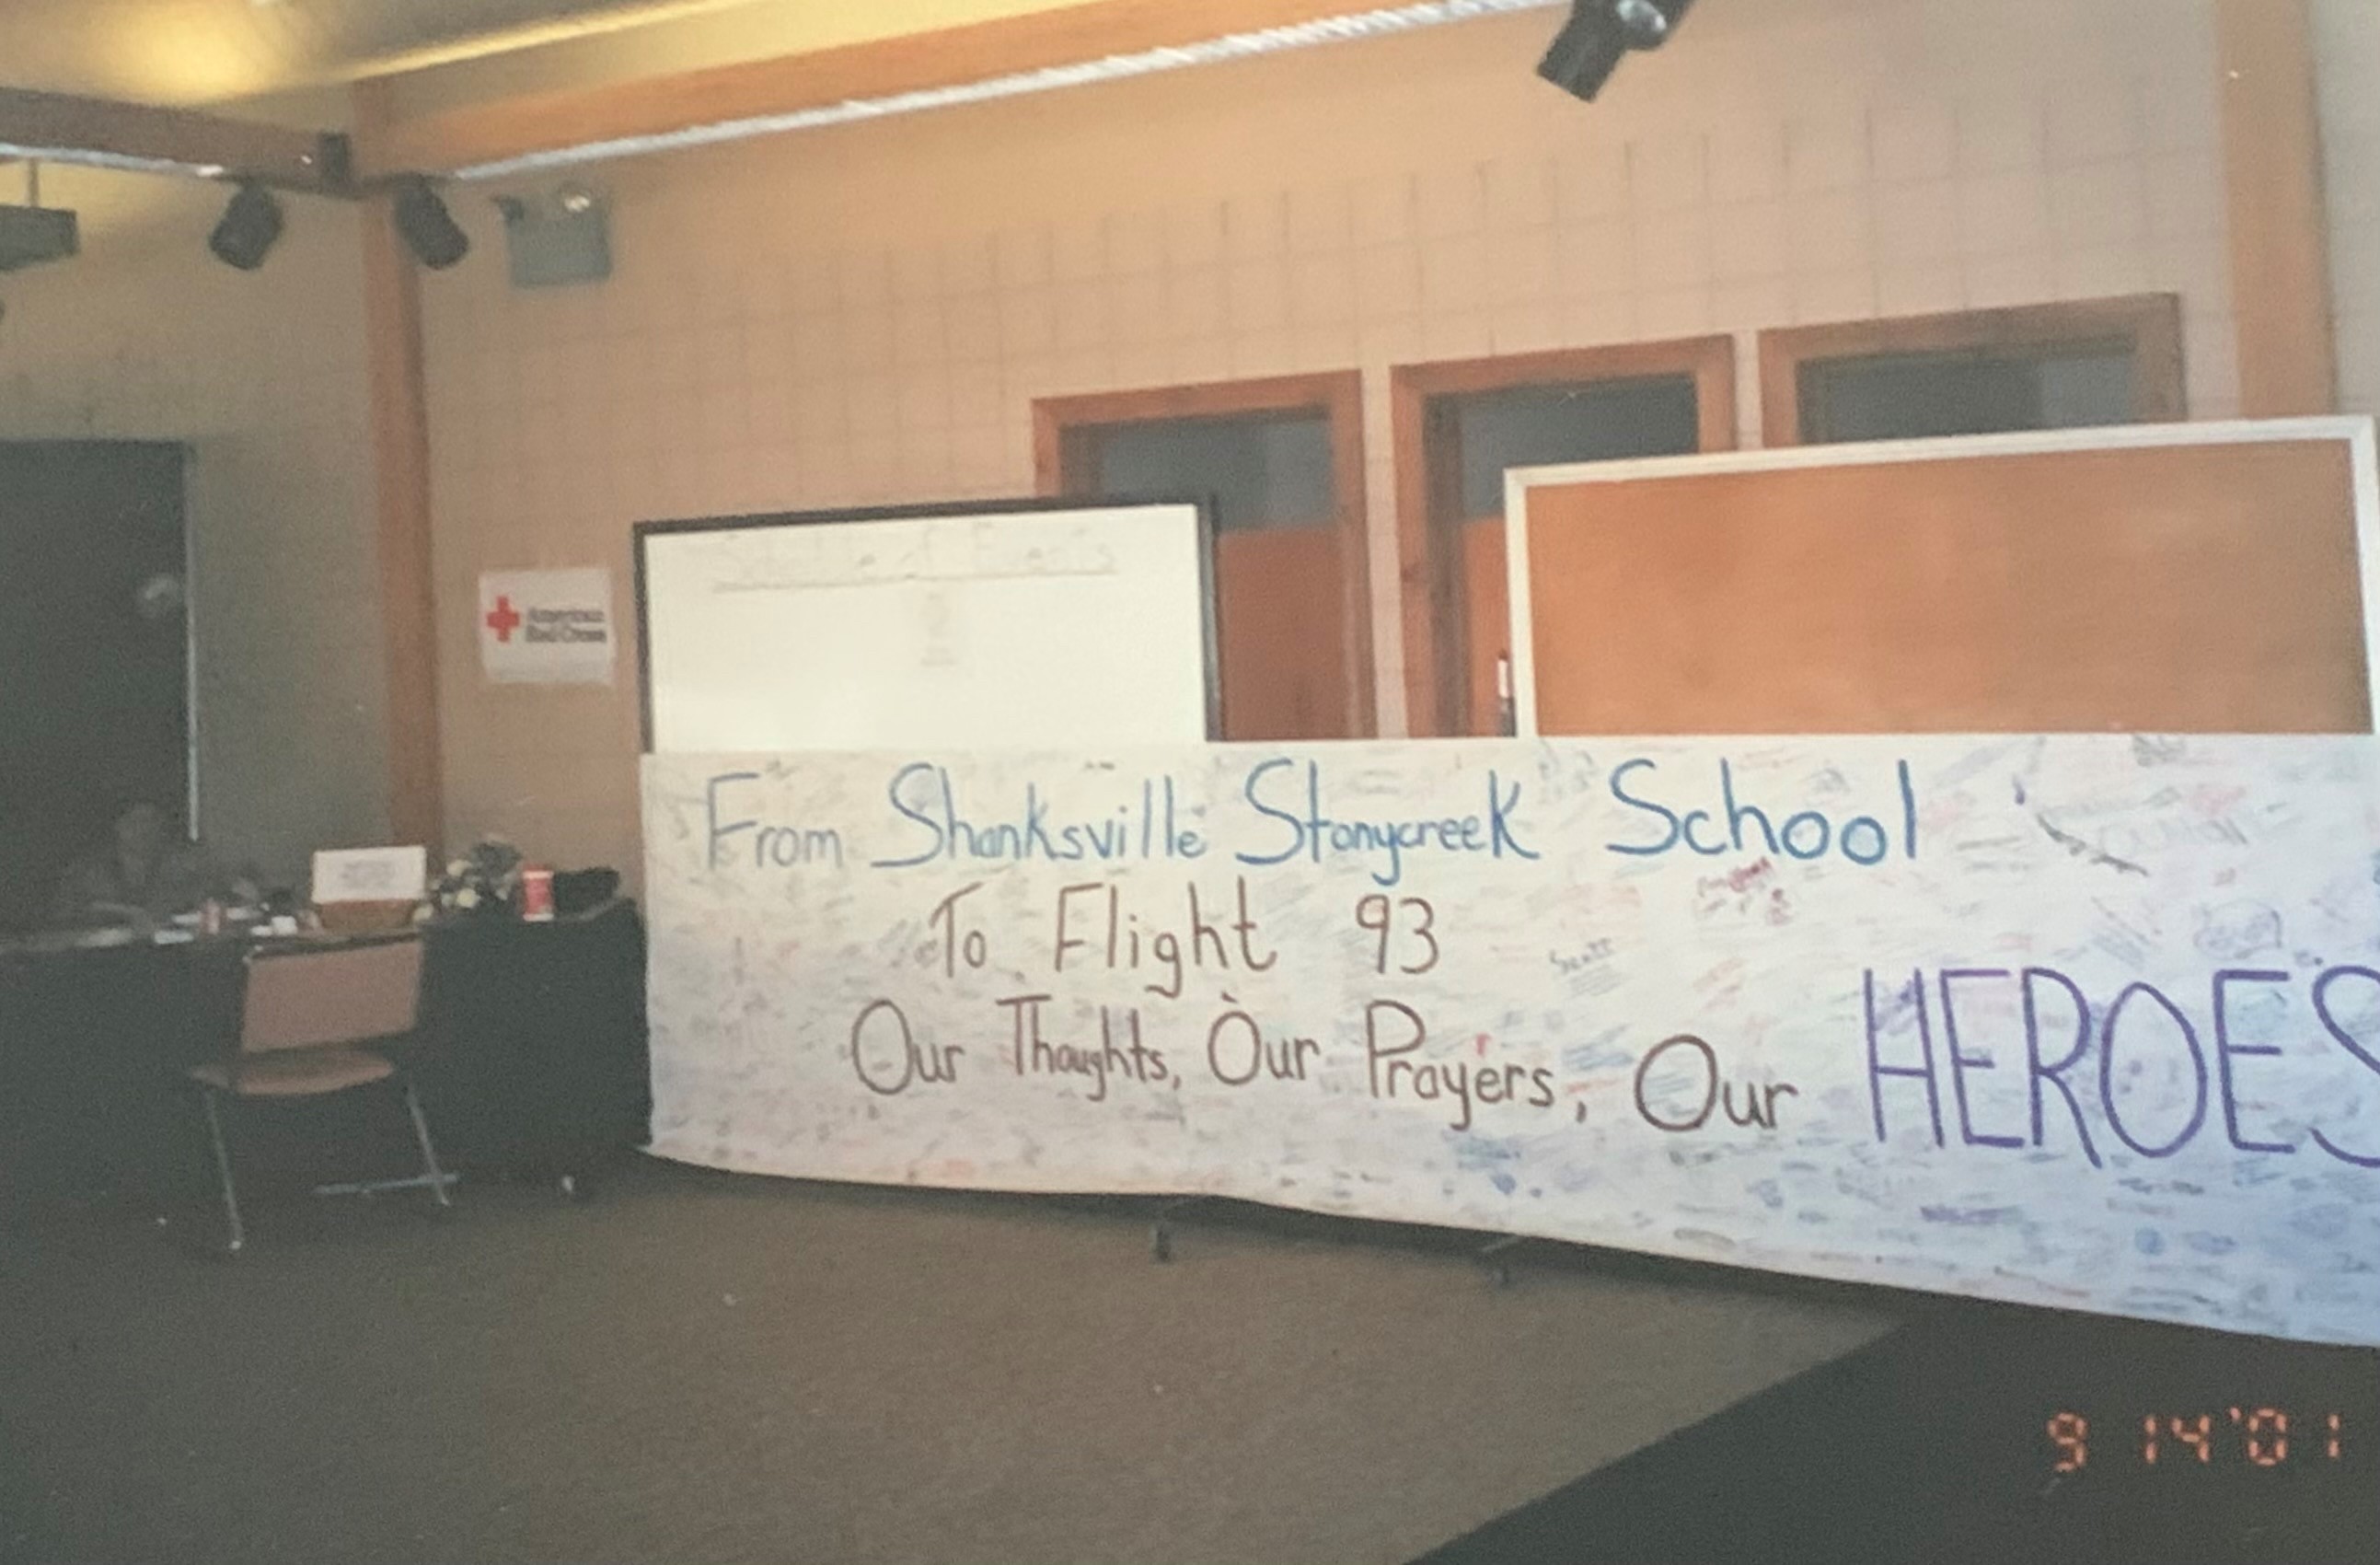 Large signed poster at an elemetary school: From Shanksville Stonycreek to Flight 93, Our Thoughts and Prayers, Our HEROES